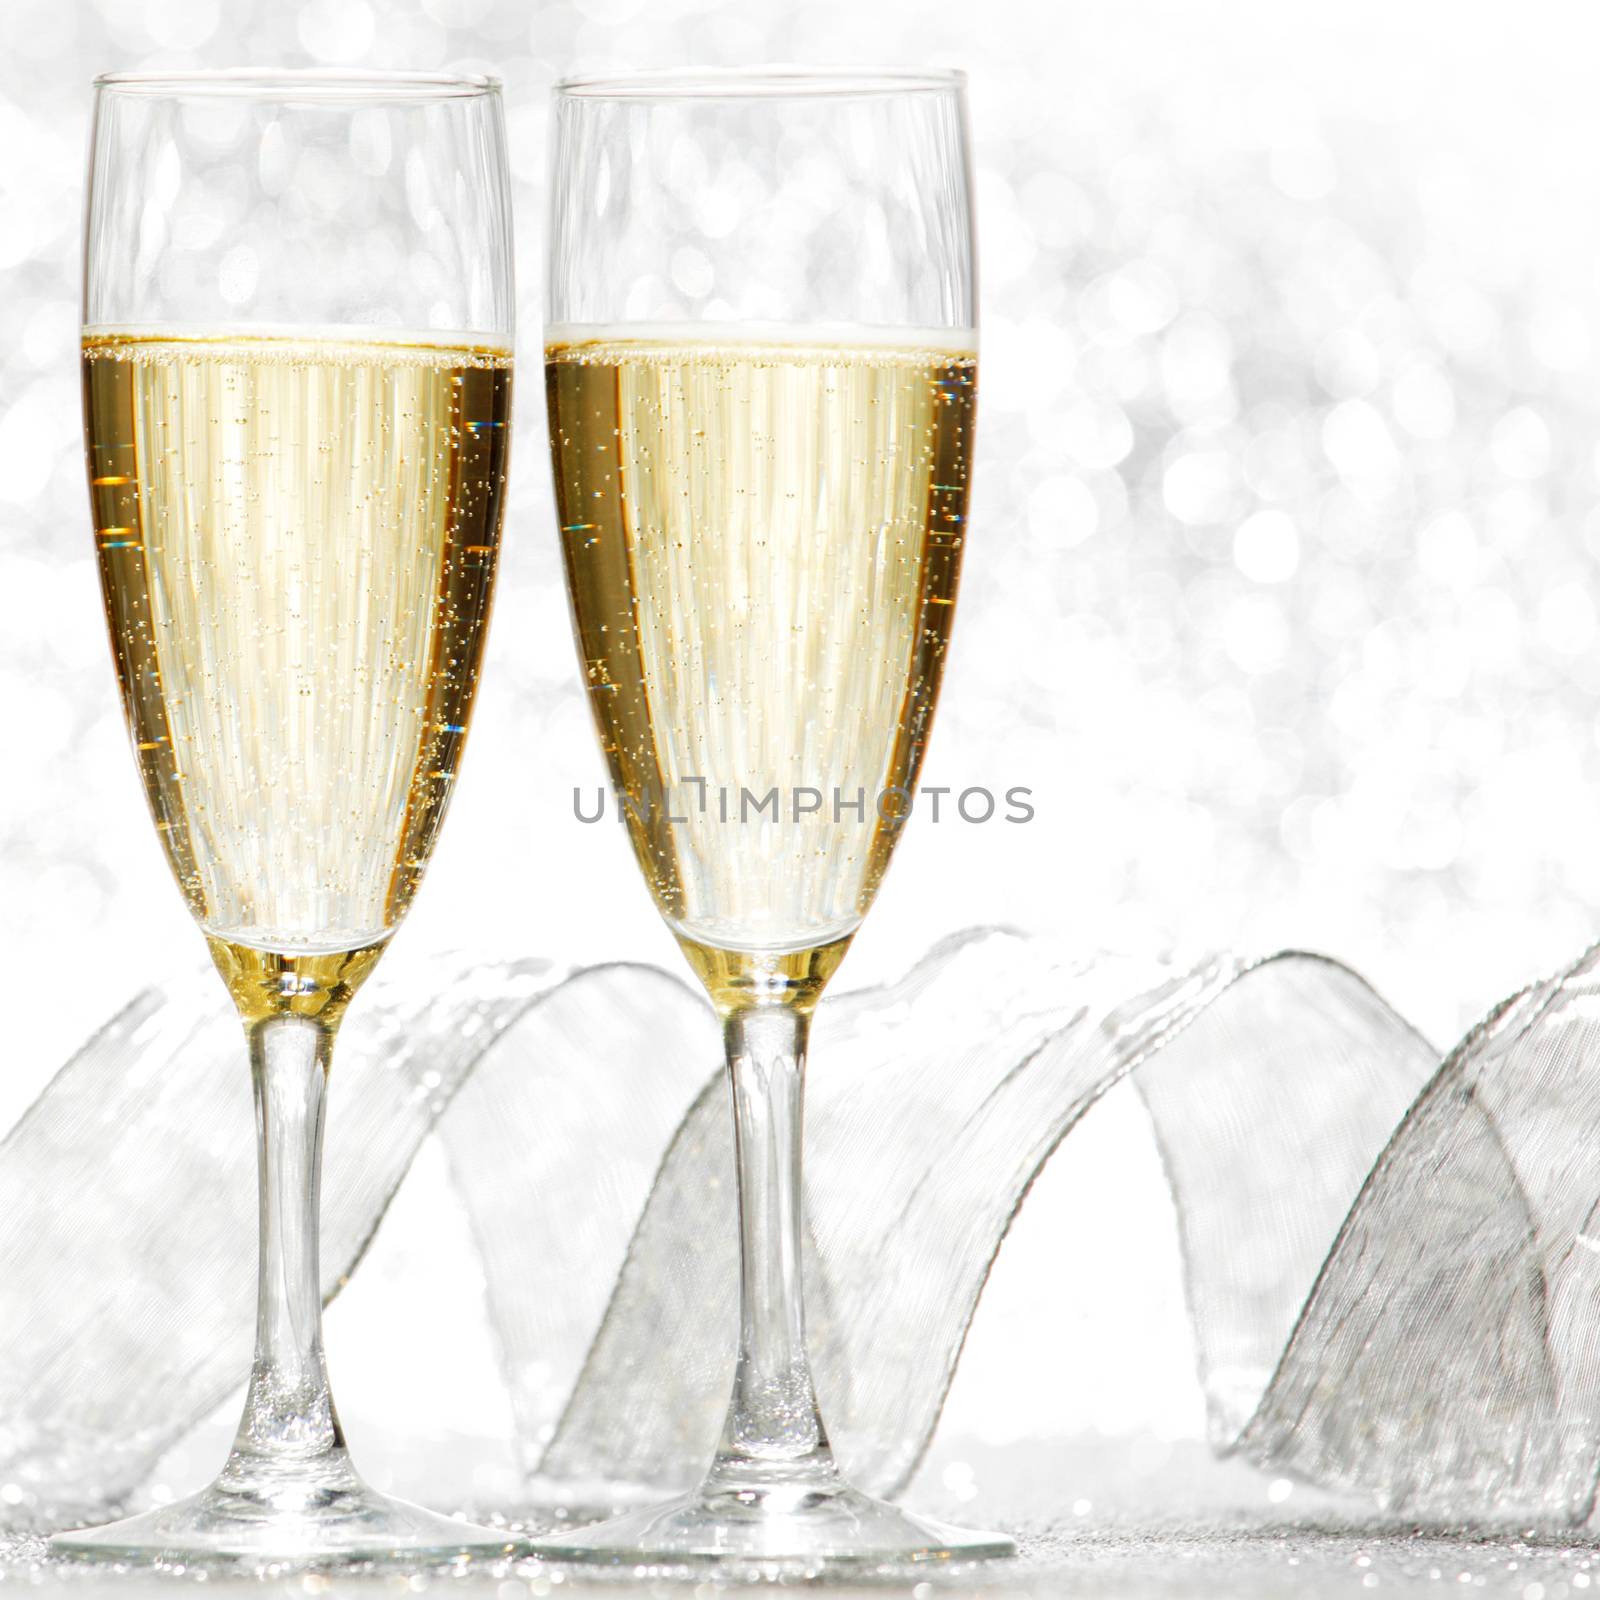 Two glasses of champagne with bow on silver background